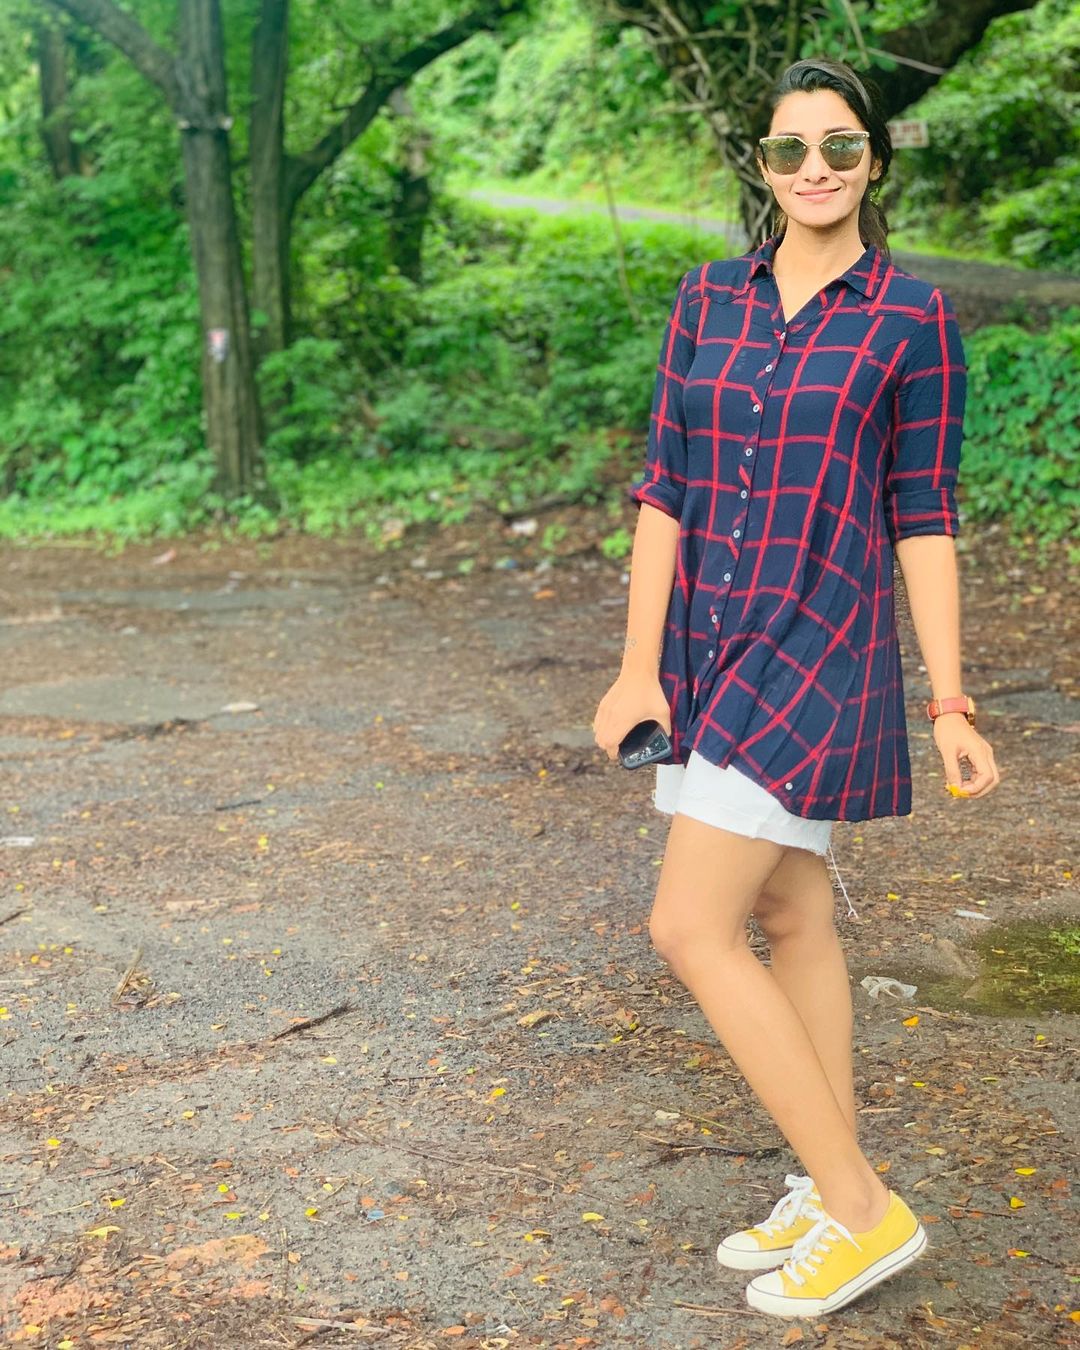 Priya Bhavani Shankar, Priya Bhavani Shankar Gallery, Priya Bhavani Shankar Images, Priya Bhavani Shankar Wall Paper, Priya Bhavani Shankar WallPaper, Priya Bhavani Shankar Wall Paper HD, Priya Bhavani Shankar Wallpaper HD, Priya Bhavani Shankar, Priya Bhavani Shankar Hot, Priya Bhavani Shankar Sexy, Priya Bhavani Shankar Tamil Actress, Priya Bhavani Shankar Talugu Actress, Priya Bhavani Shankar Malayalam Actress, Priya Bhavani Shankar Bollywood Actress, Priya Bhavani Shankar Tollywood Actress, Priya Bhavani Shankar Kollywood Actress, Priya Bhavani Shankar Mollywood Actress, Priya Bhavani Shankar Actress Troll, Priya Bhavani Shankar Actress Trending, Priya Bhavani Shankar Glamour, Priya Bhavani Shankar Classic, Priya Bhavani Shankar Traditional, Priya Bhavani Shankar Saree, Priya Bhavani Shankar Wall Paper, Priya Bhavani Shankar Photos, Priya Bhavani Shankar Bio Data, Priya Bhavani Shankar Profile, Priya Bhavani Shankar Age, Priya Bhavani Shankar Height, Priya Bhavani Shankar Biography, Priya Bhavani Shankar Latest Photos Images